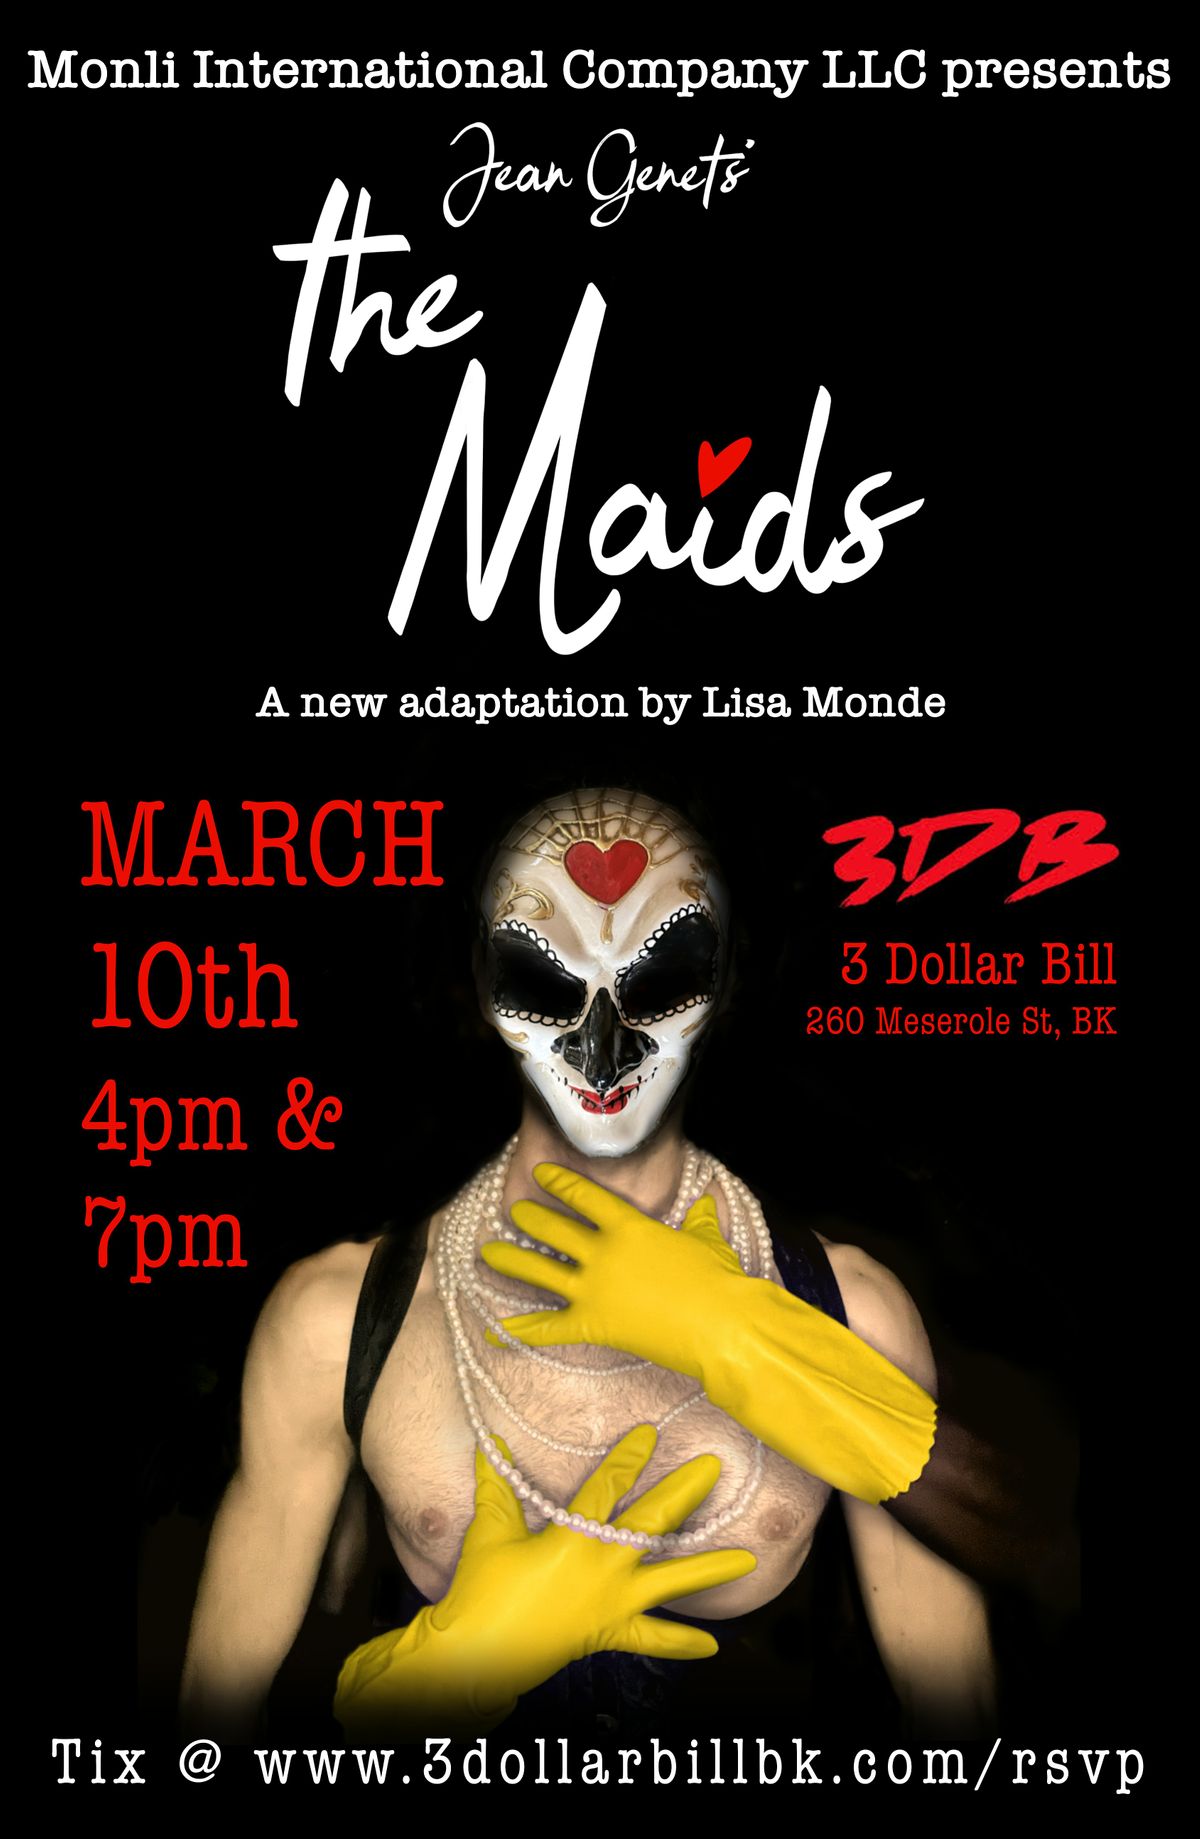 Jean Genet's "The Maids", A new adaptation of the play by Lisa Monde